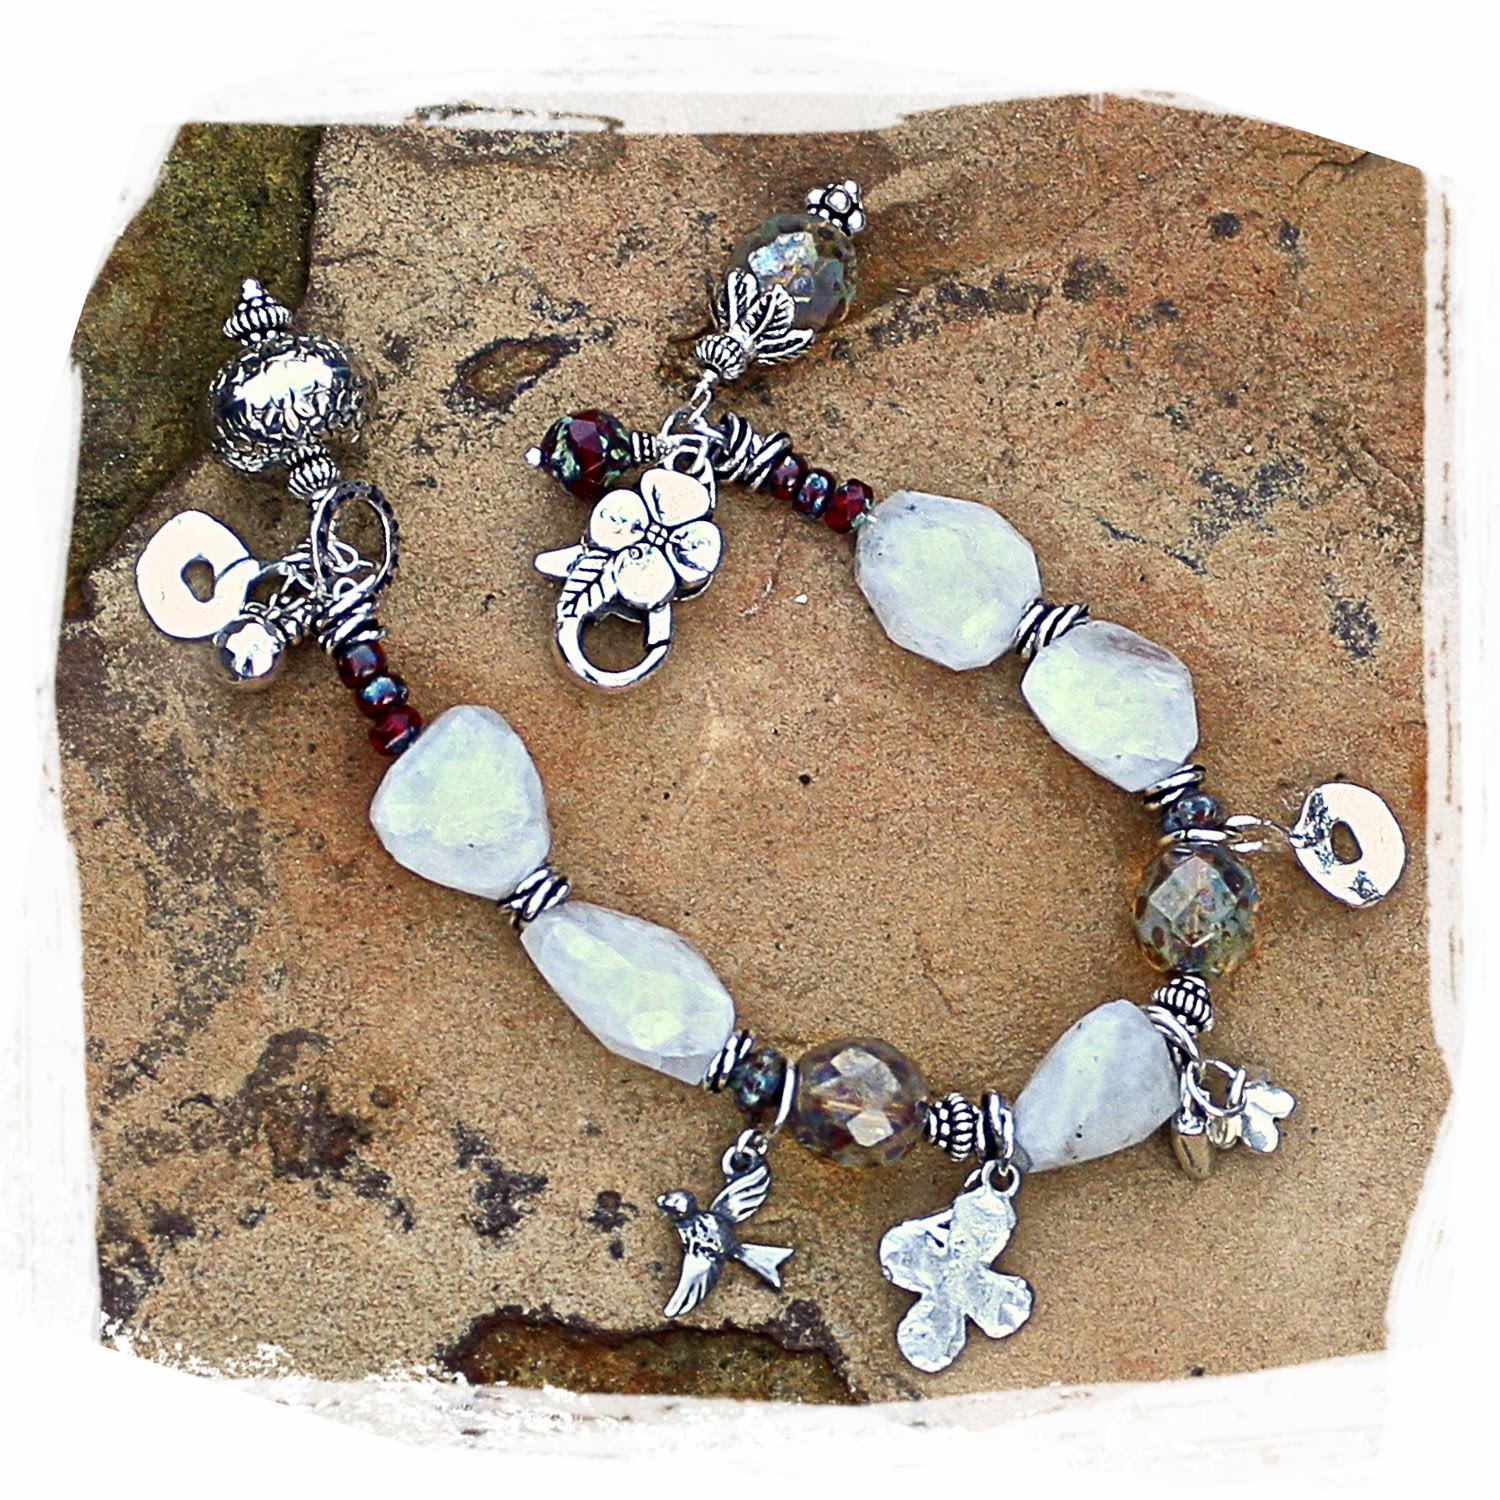 pretty new bracelet has been listed in the shop.